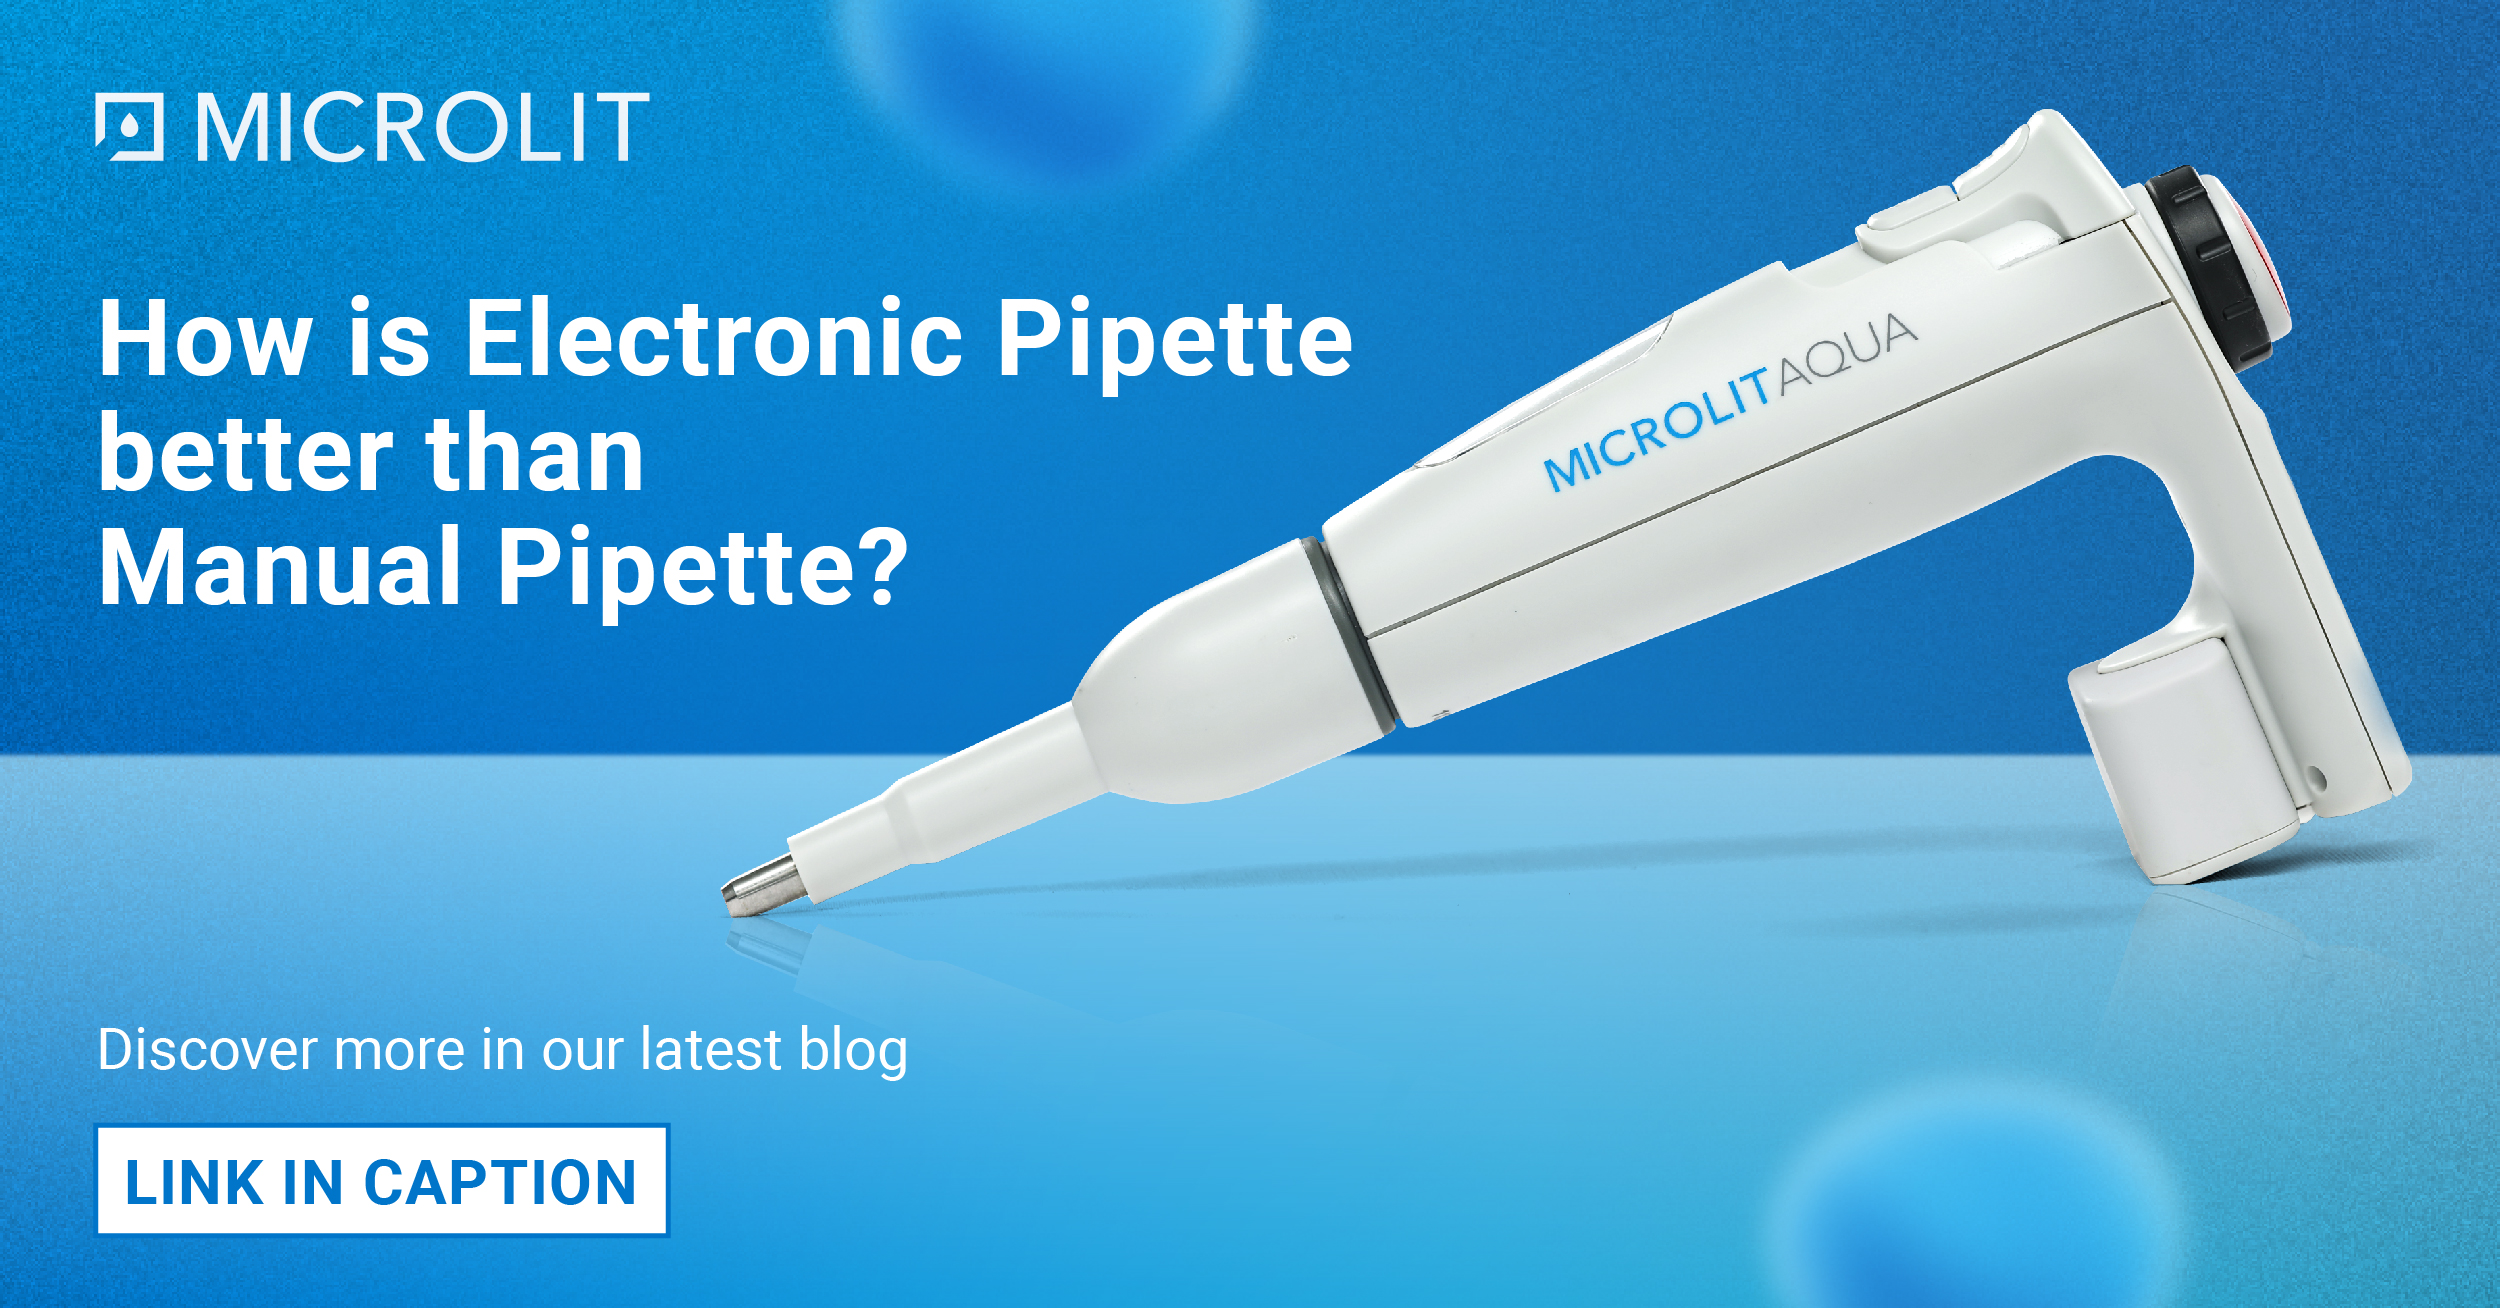 How is Electronic Pipette better than Manual Pipette?